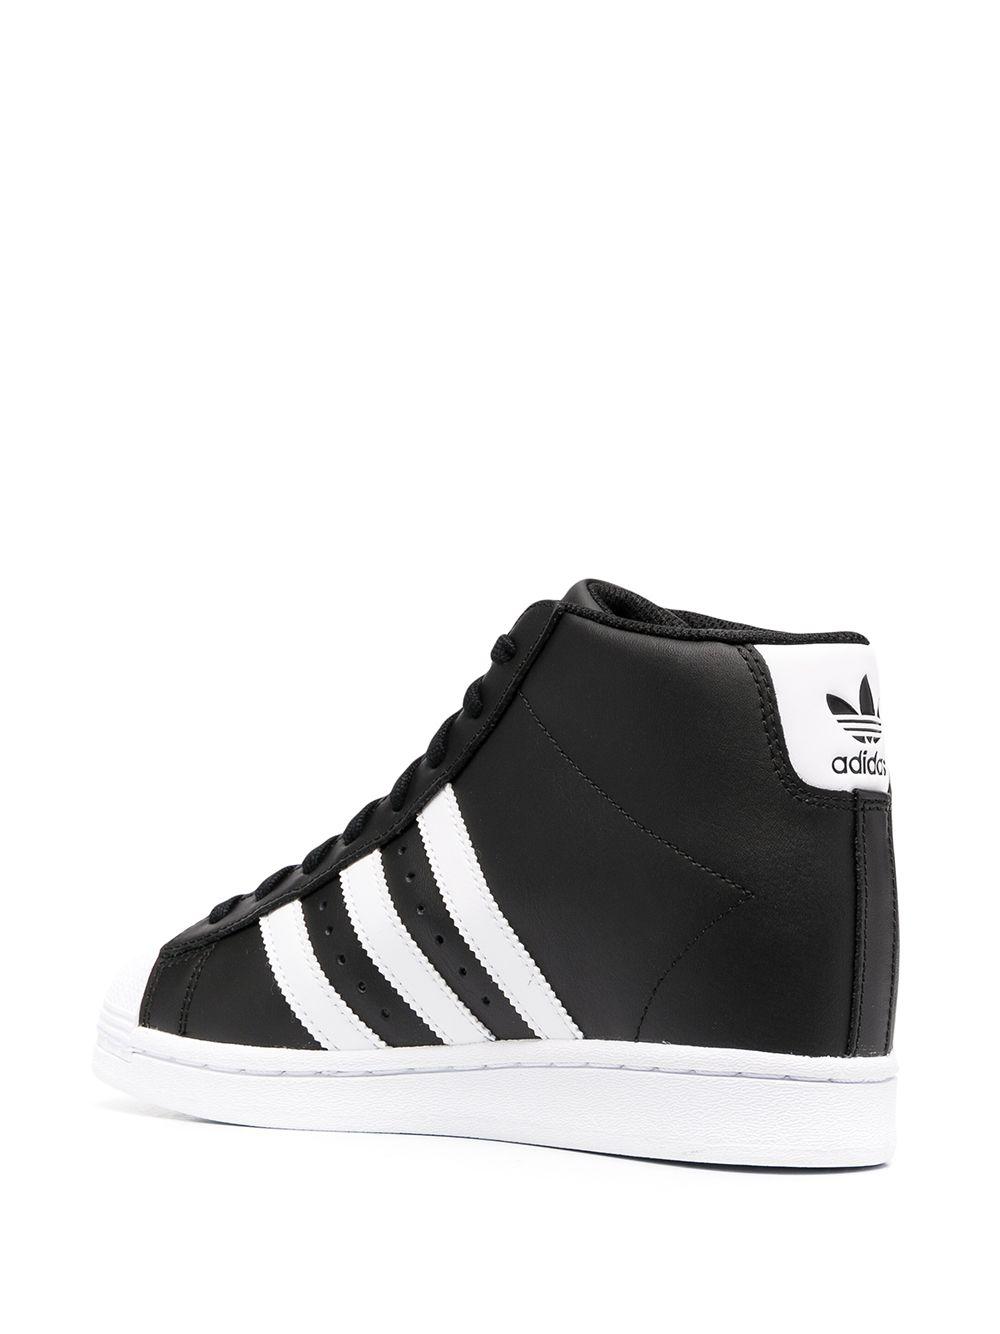 adidas Superstar Up Leather High-top Sneakers in Black - Lyst